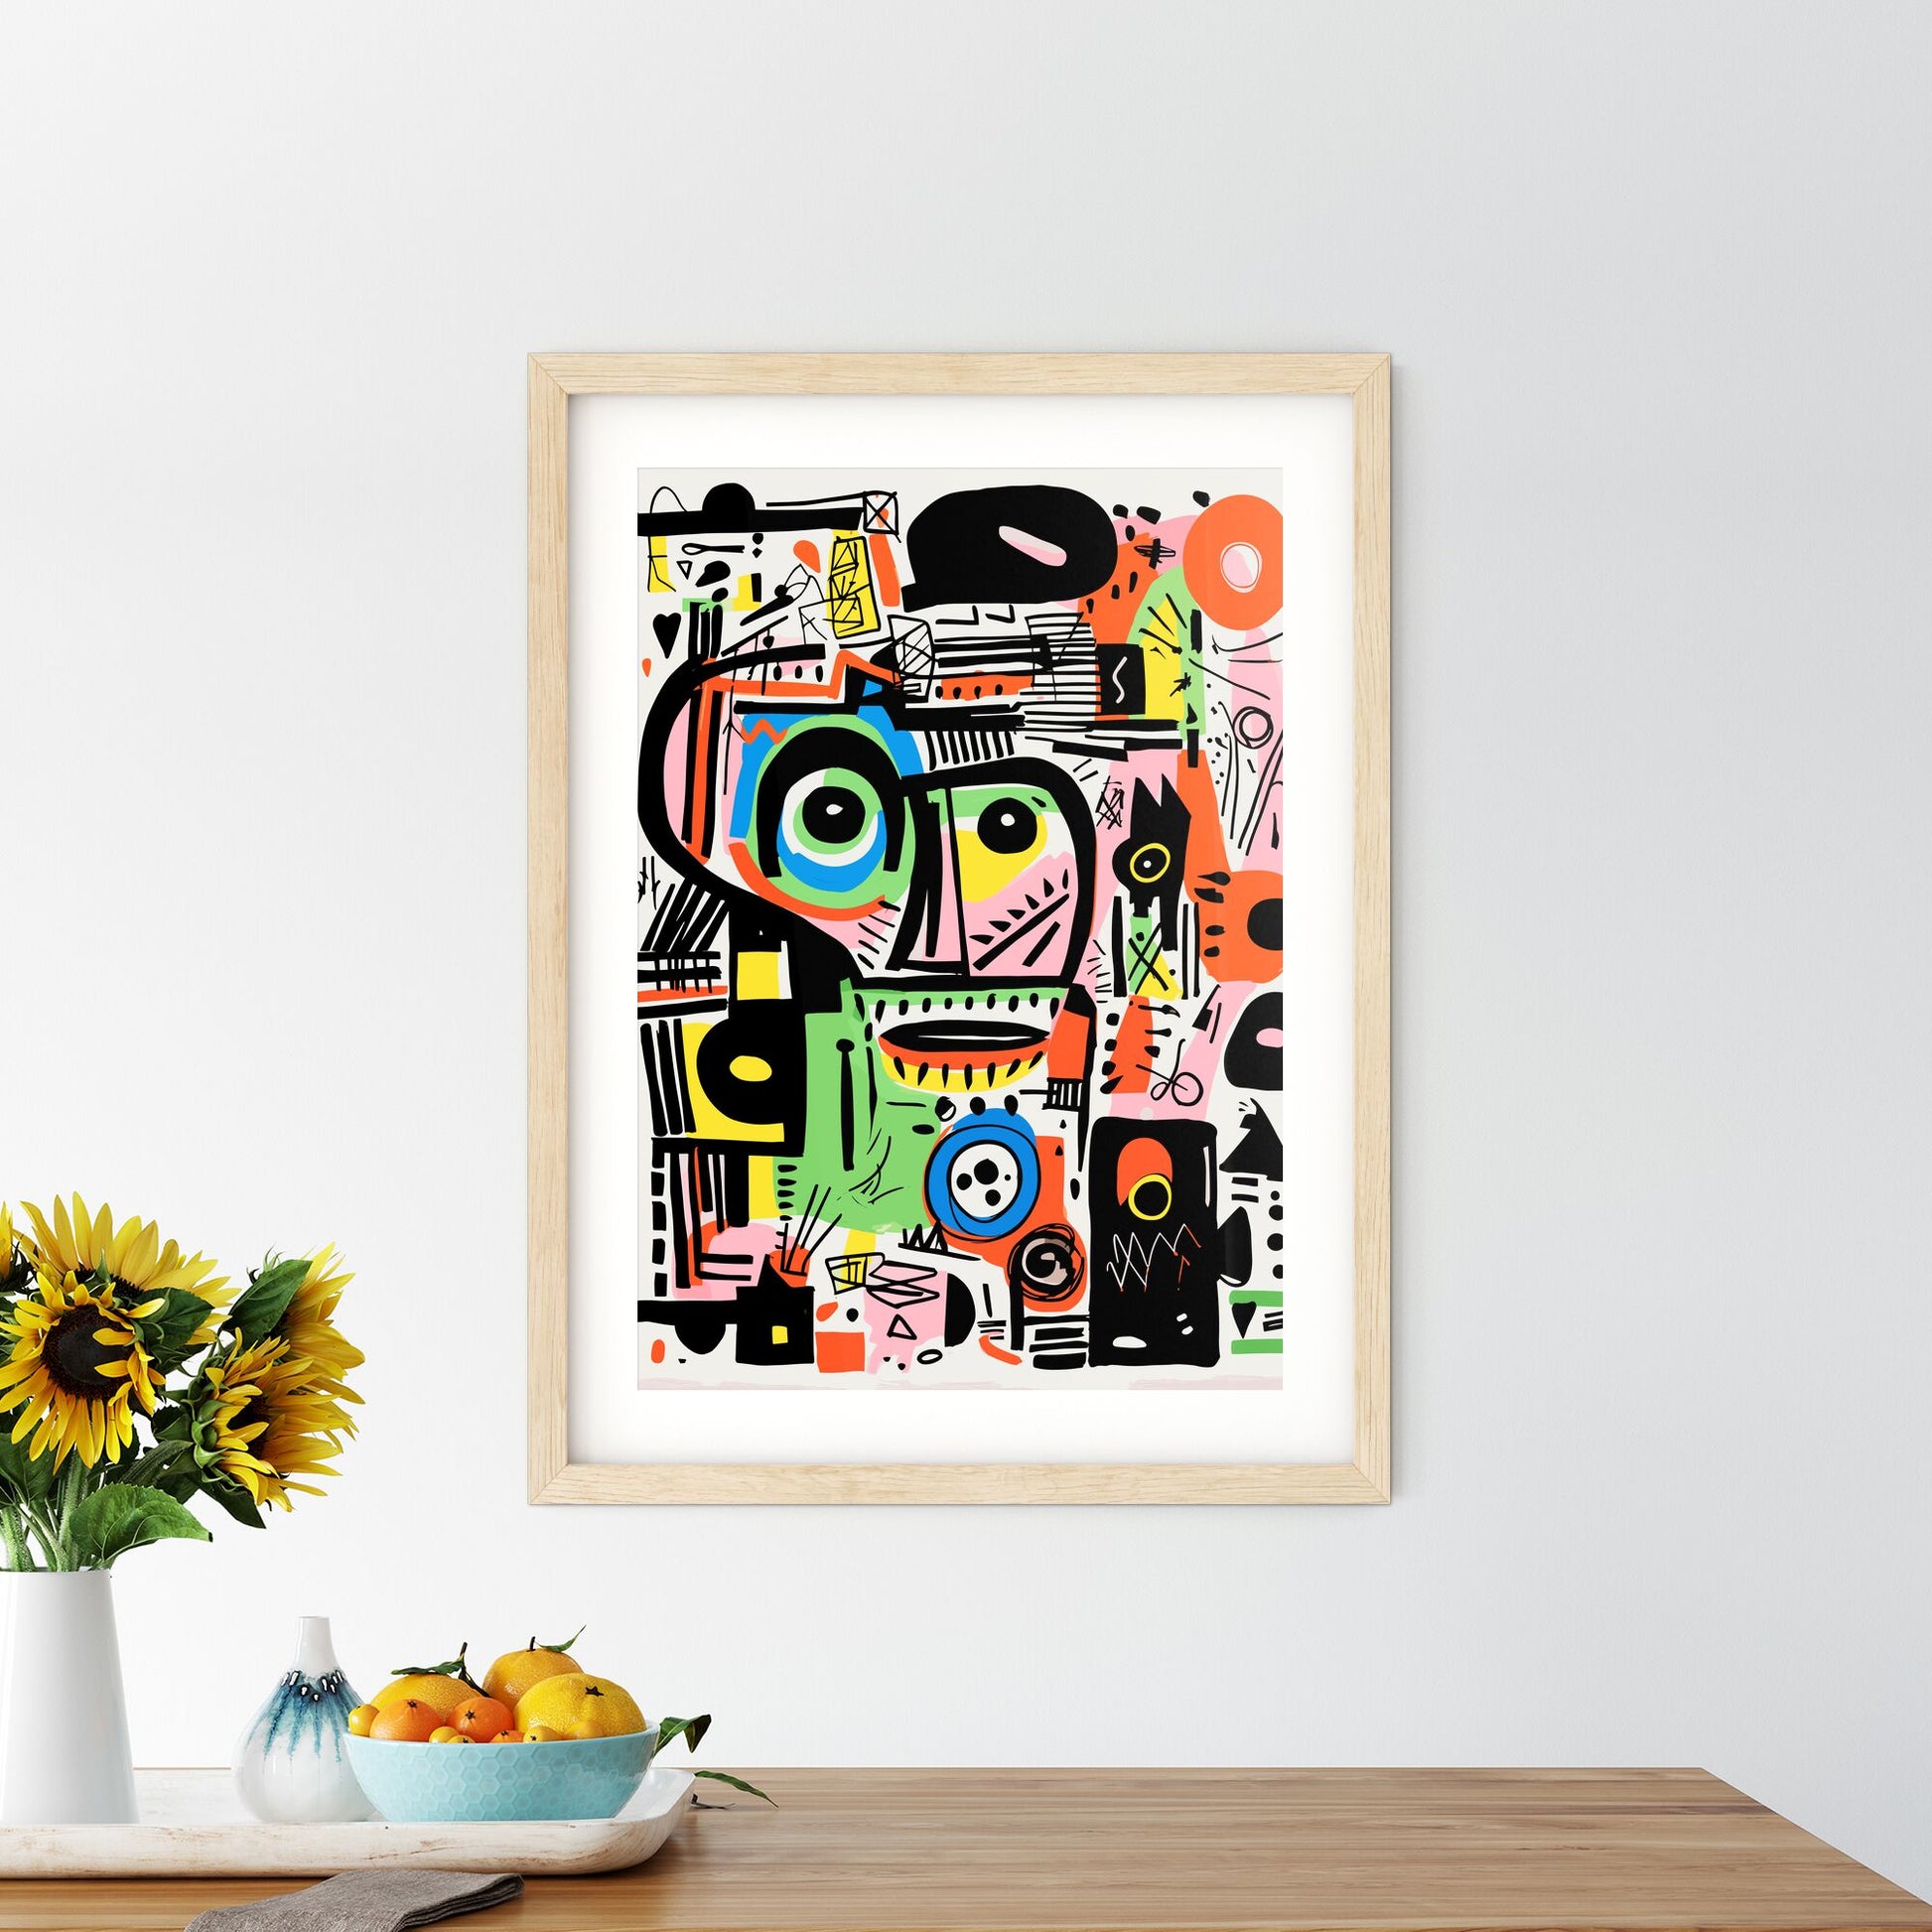 Zen Feeling Art Print - A Colorful Art Piece With Different Shapes And Colors Default Title